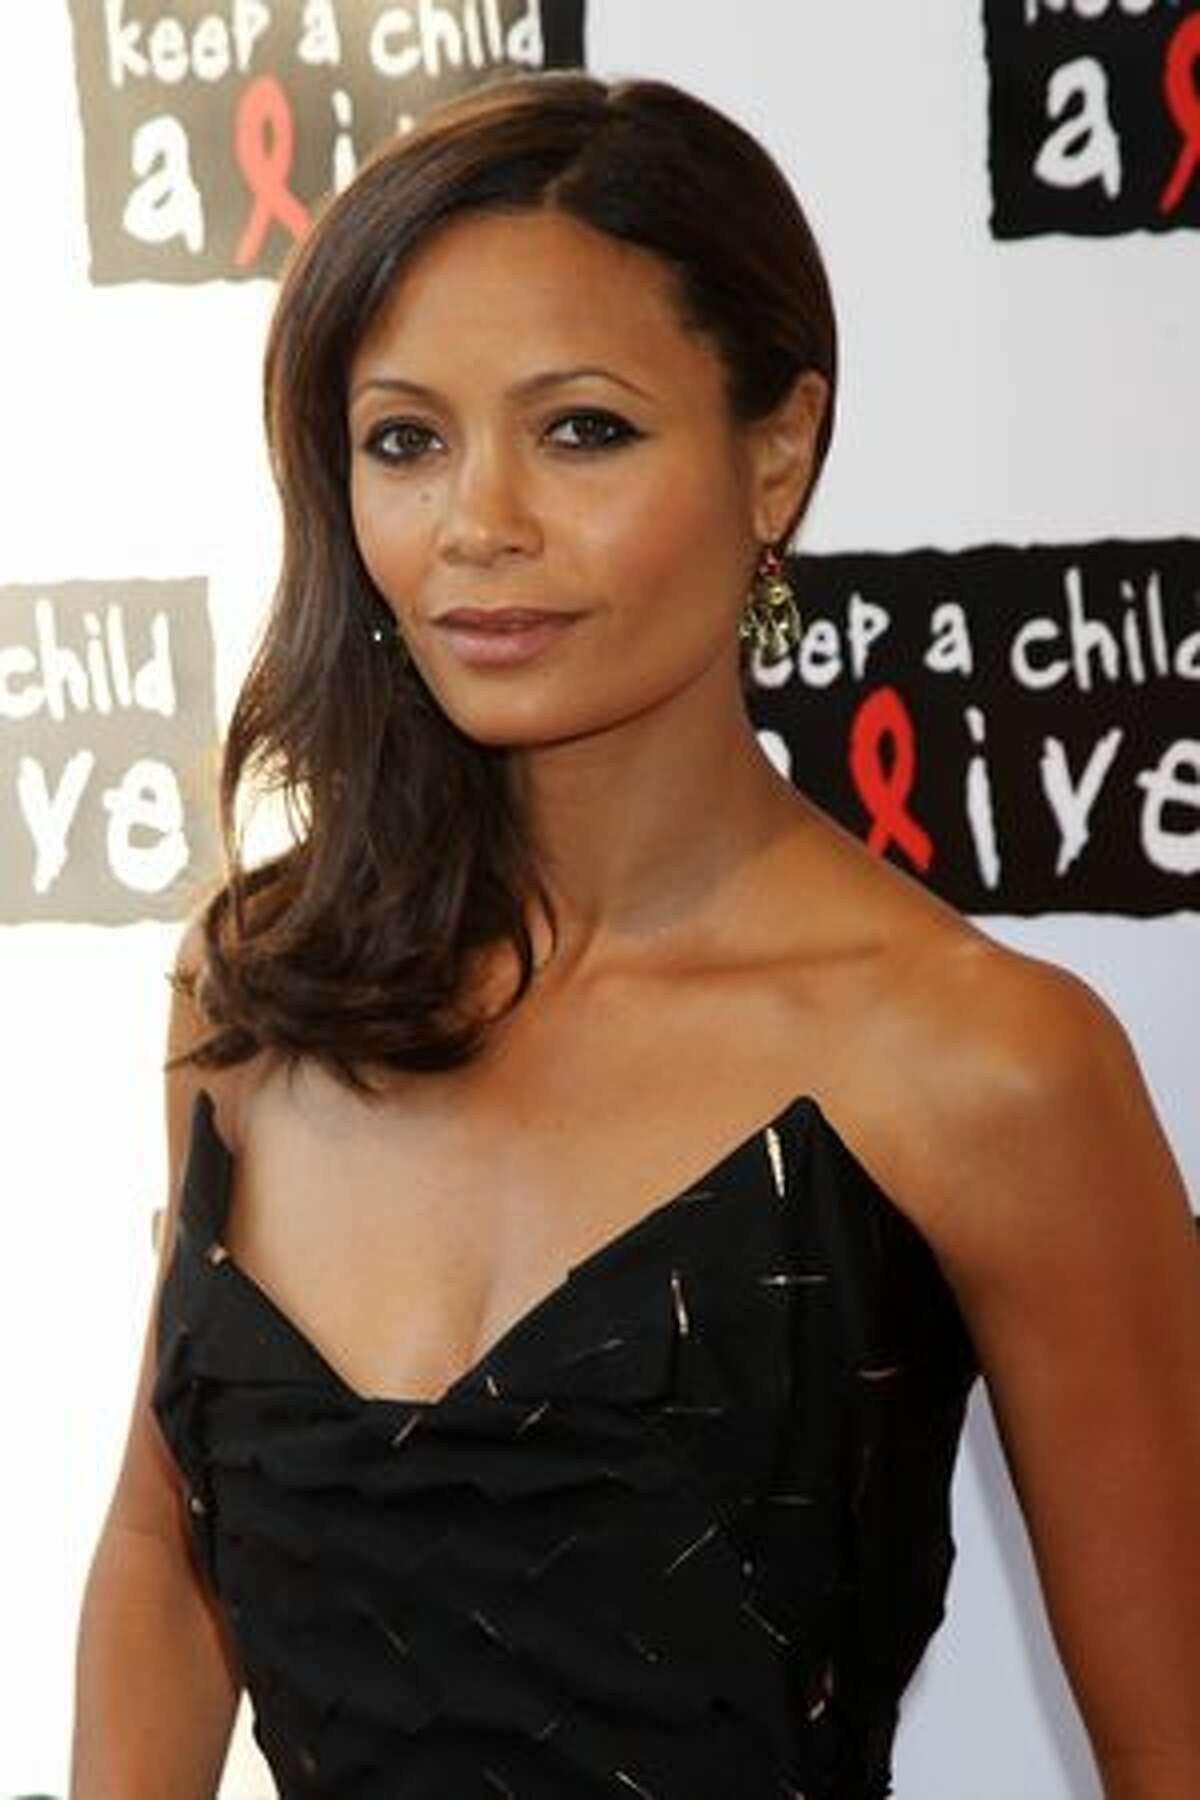 Thandie Newton arrives at the Keep A Child Alive Black Ball held at St John's, Smith Square on May 27 in London, England.